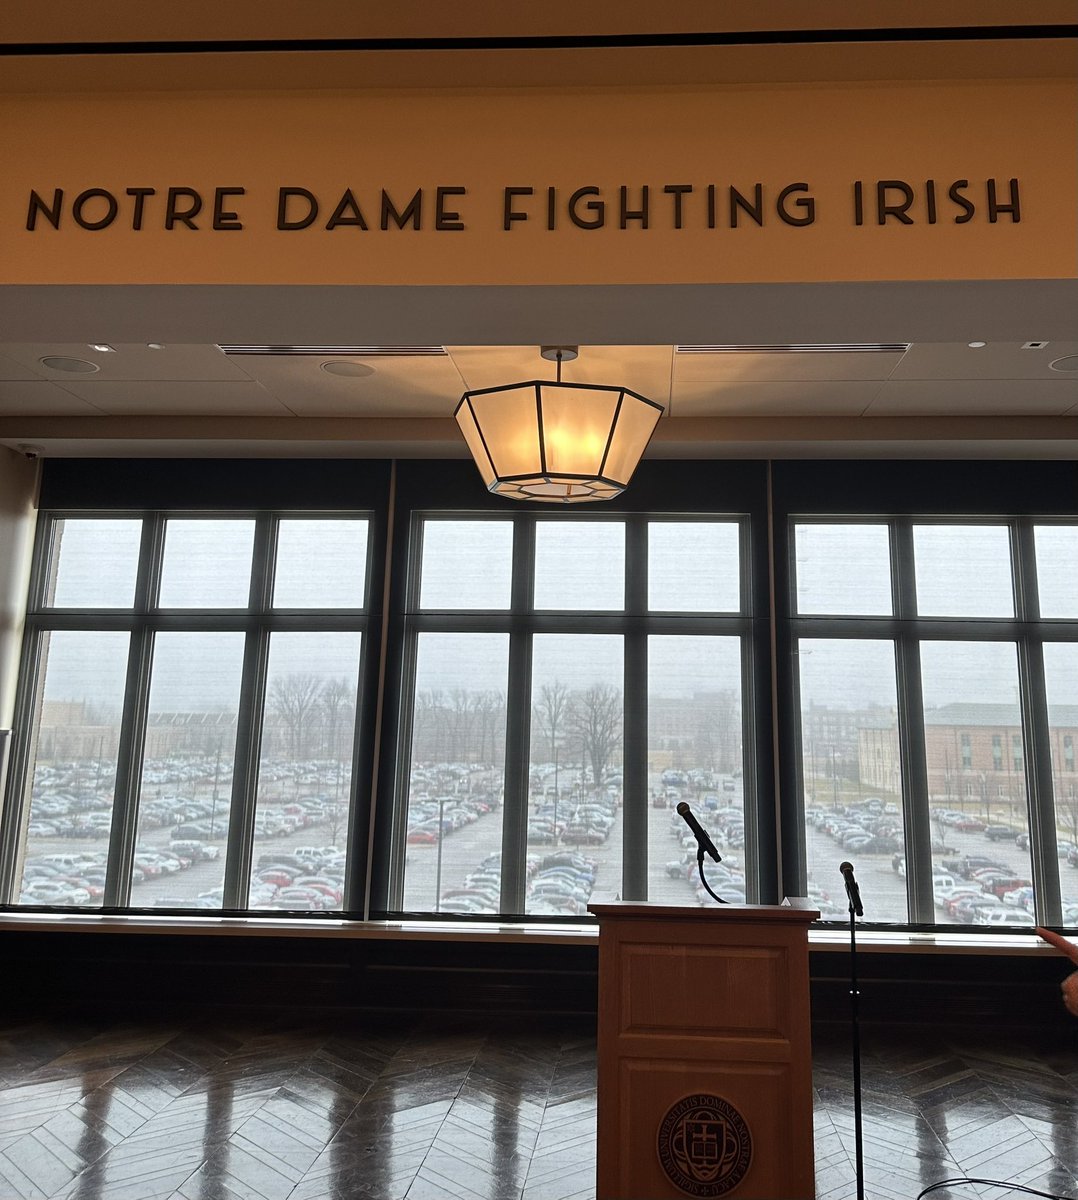 At Notre Dame today! Looking forward to connecting with everyone. Thanks, Eve! @aacu